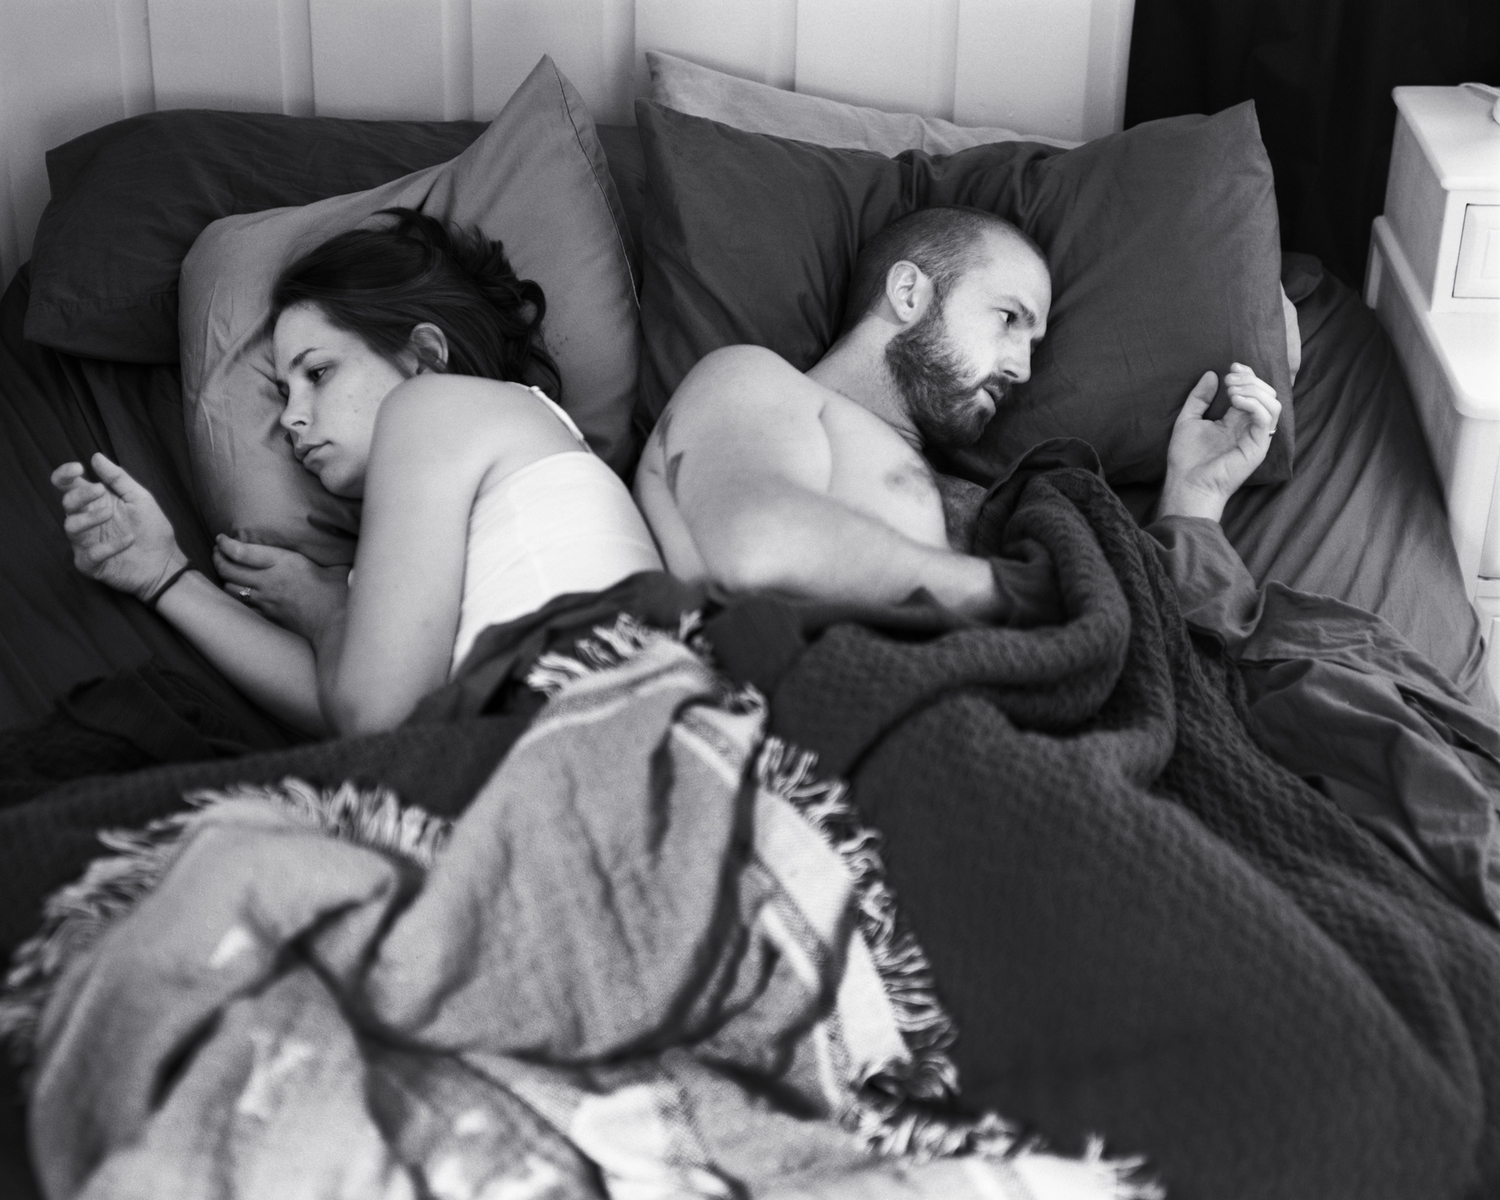 Self portrait of the artist Eric Pickersgill and his wife Angie as they lay back to back while using thier non existant phones. The black and white portrait shows the young couple ignoring each other in bed.